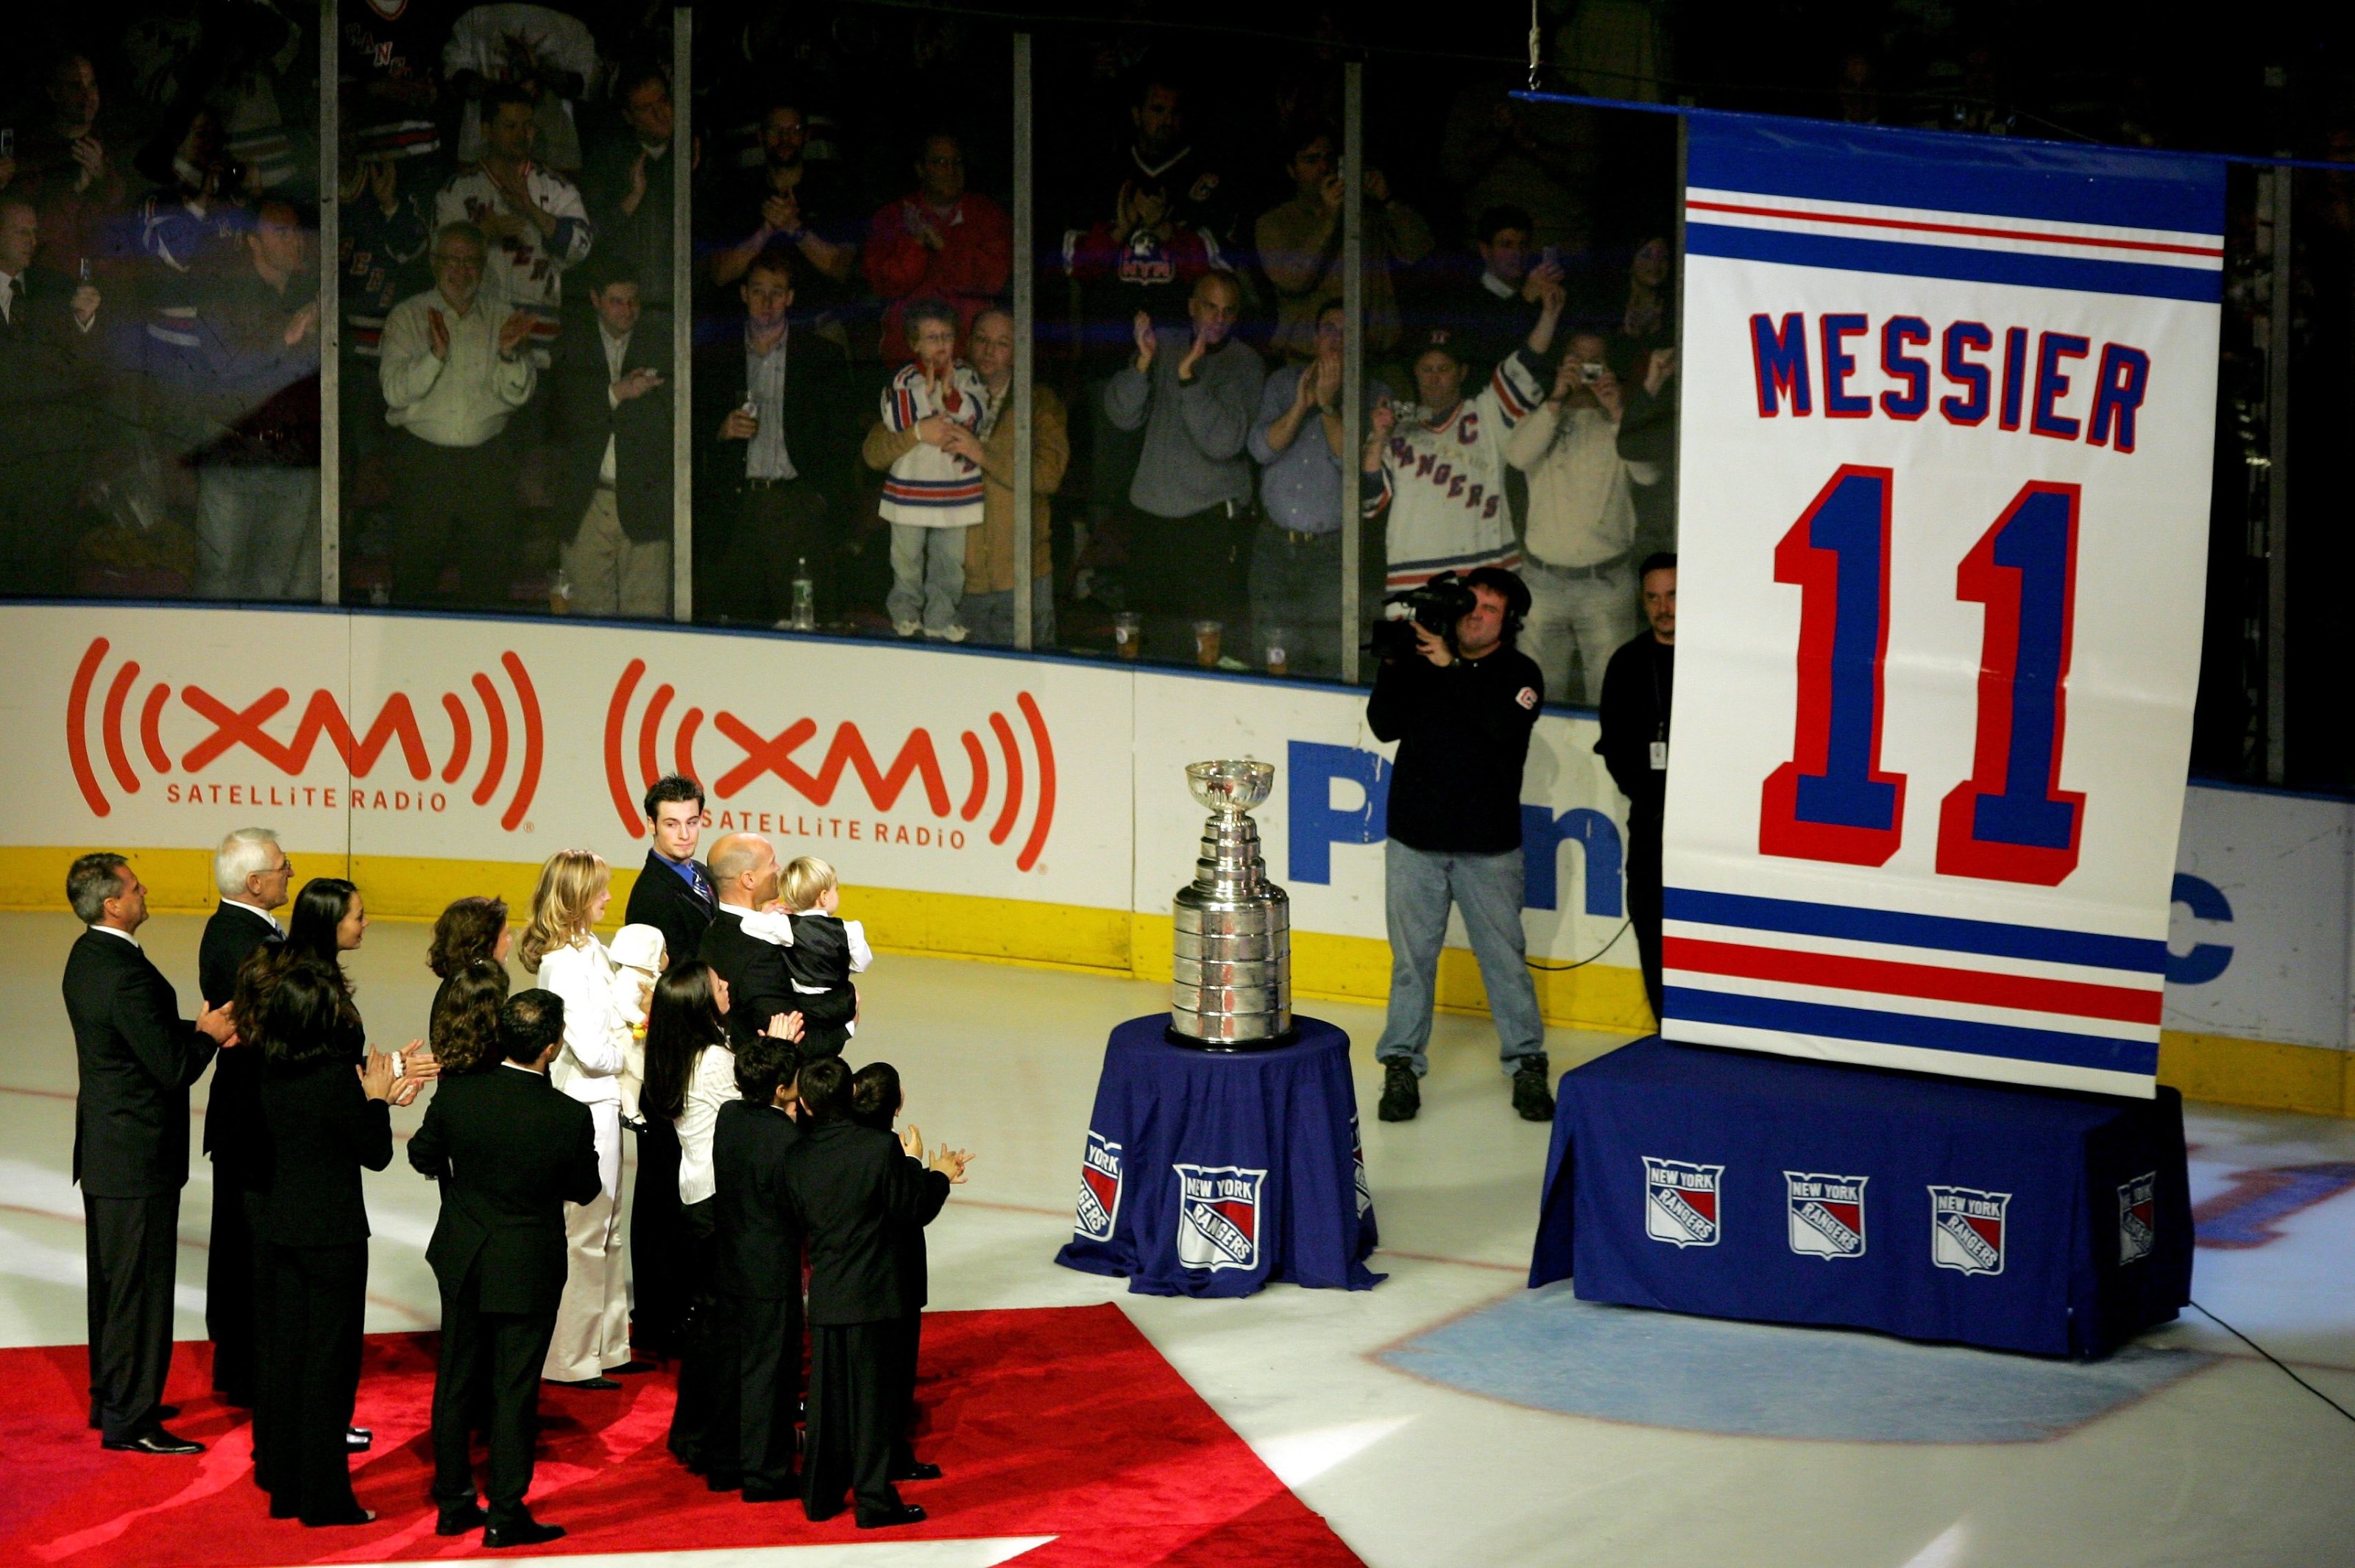 New York Rangers longtime captain Mark Messier has his No. 11 raised to the  MSG rafters at Madison Square Garden in New York City on January 12, 2006.  Mark Messier becomes the